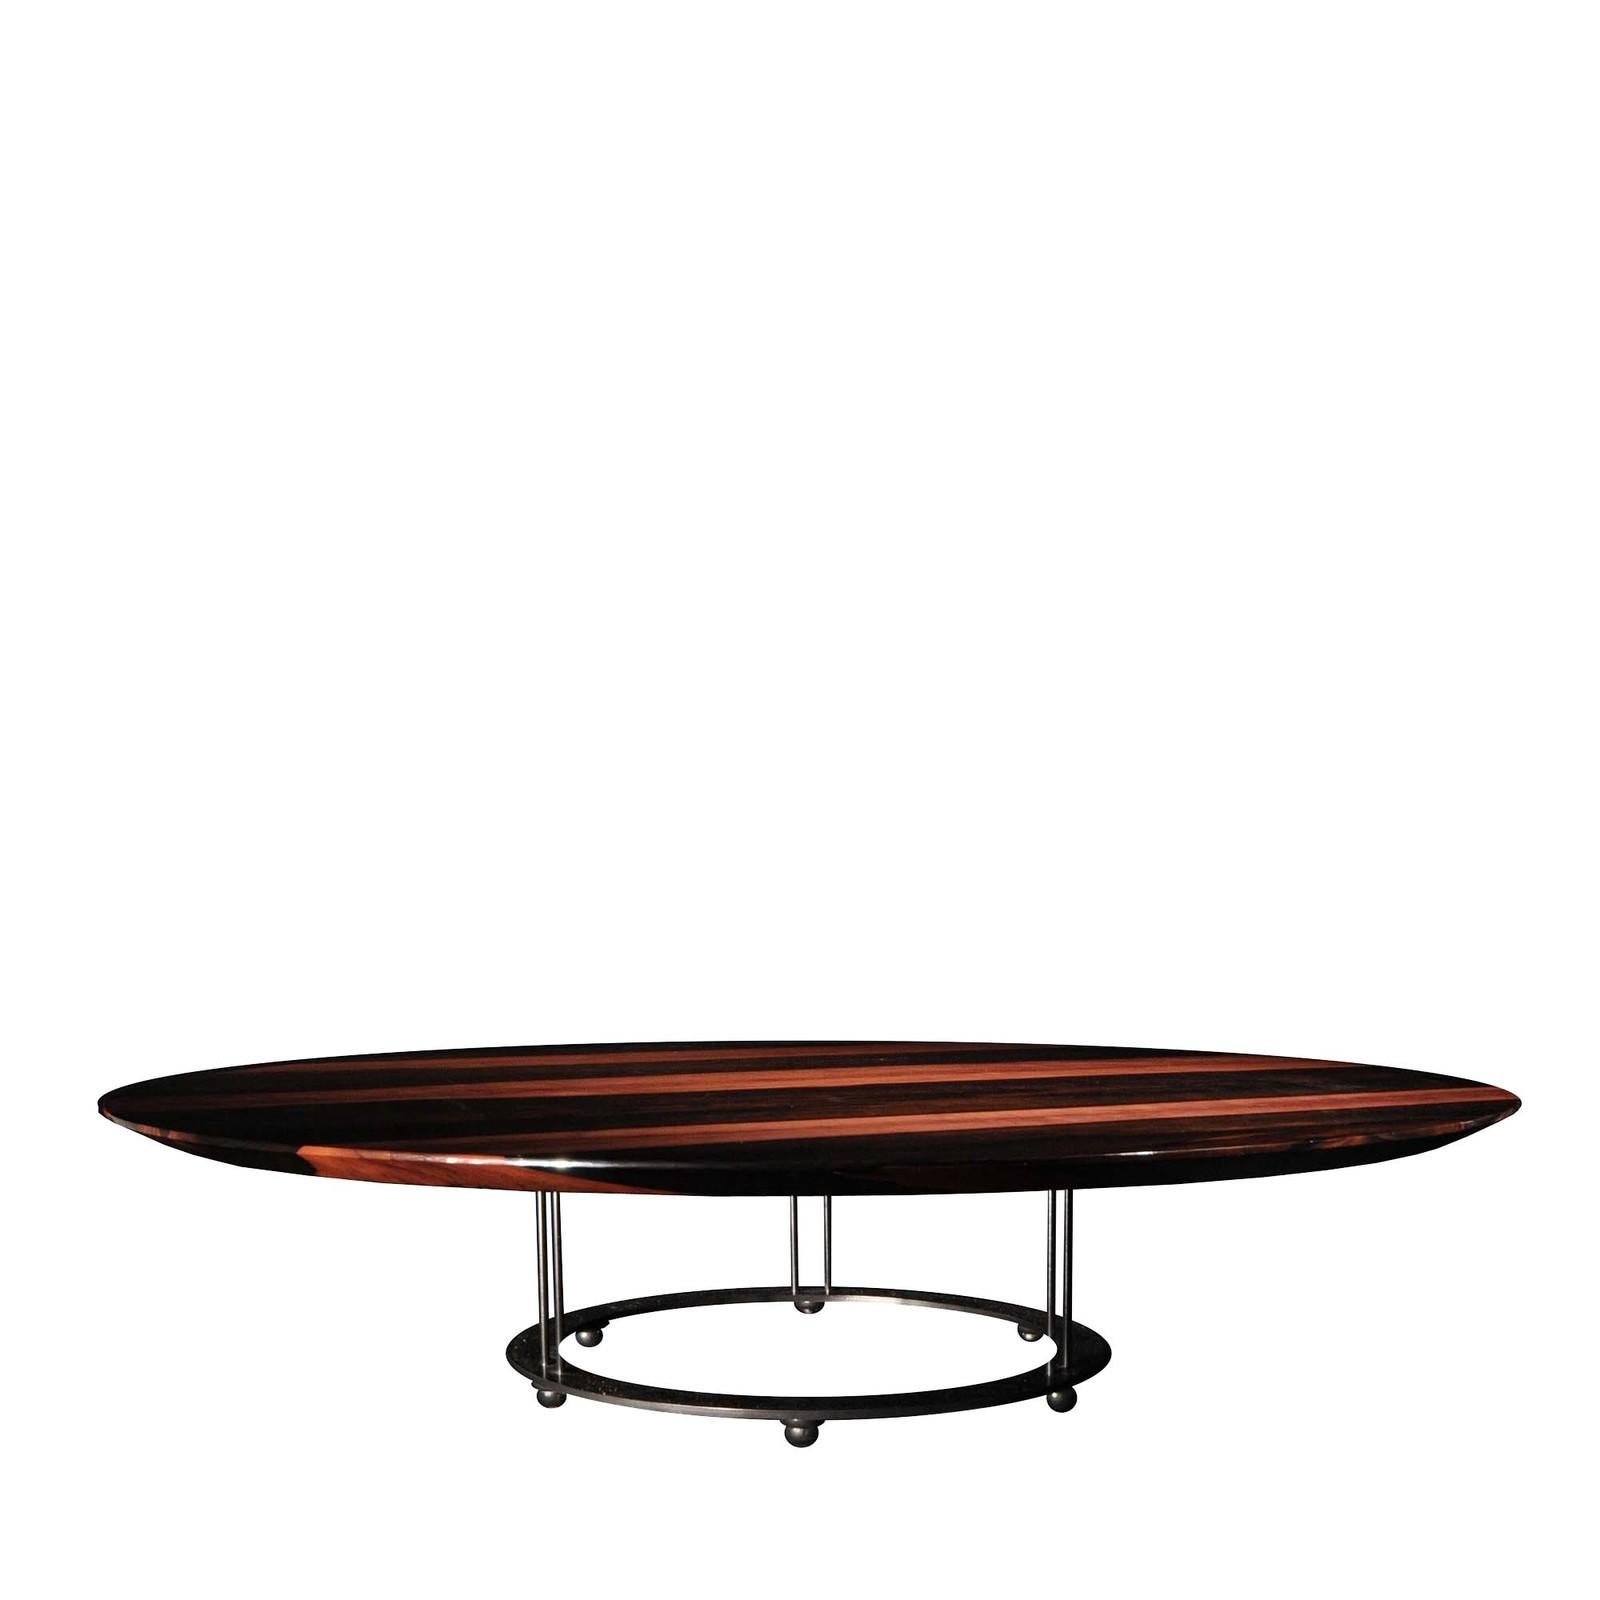 Sculptural in its simplicity, this exceptional coffee table boasts subtle contours and bold materials that capture its Minimalist aesthetic. The wide round tabletop is fashioned of Macassar ebony, notable for its rich wood grain with hues of dark